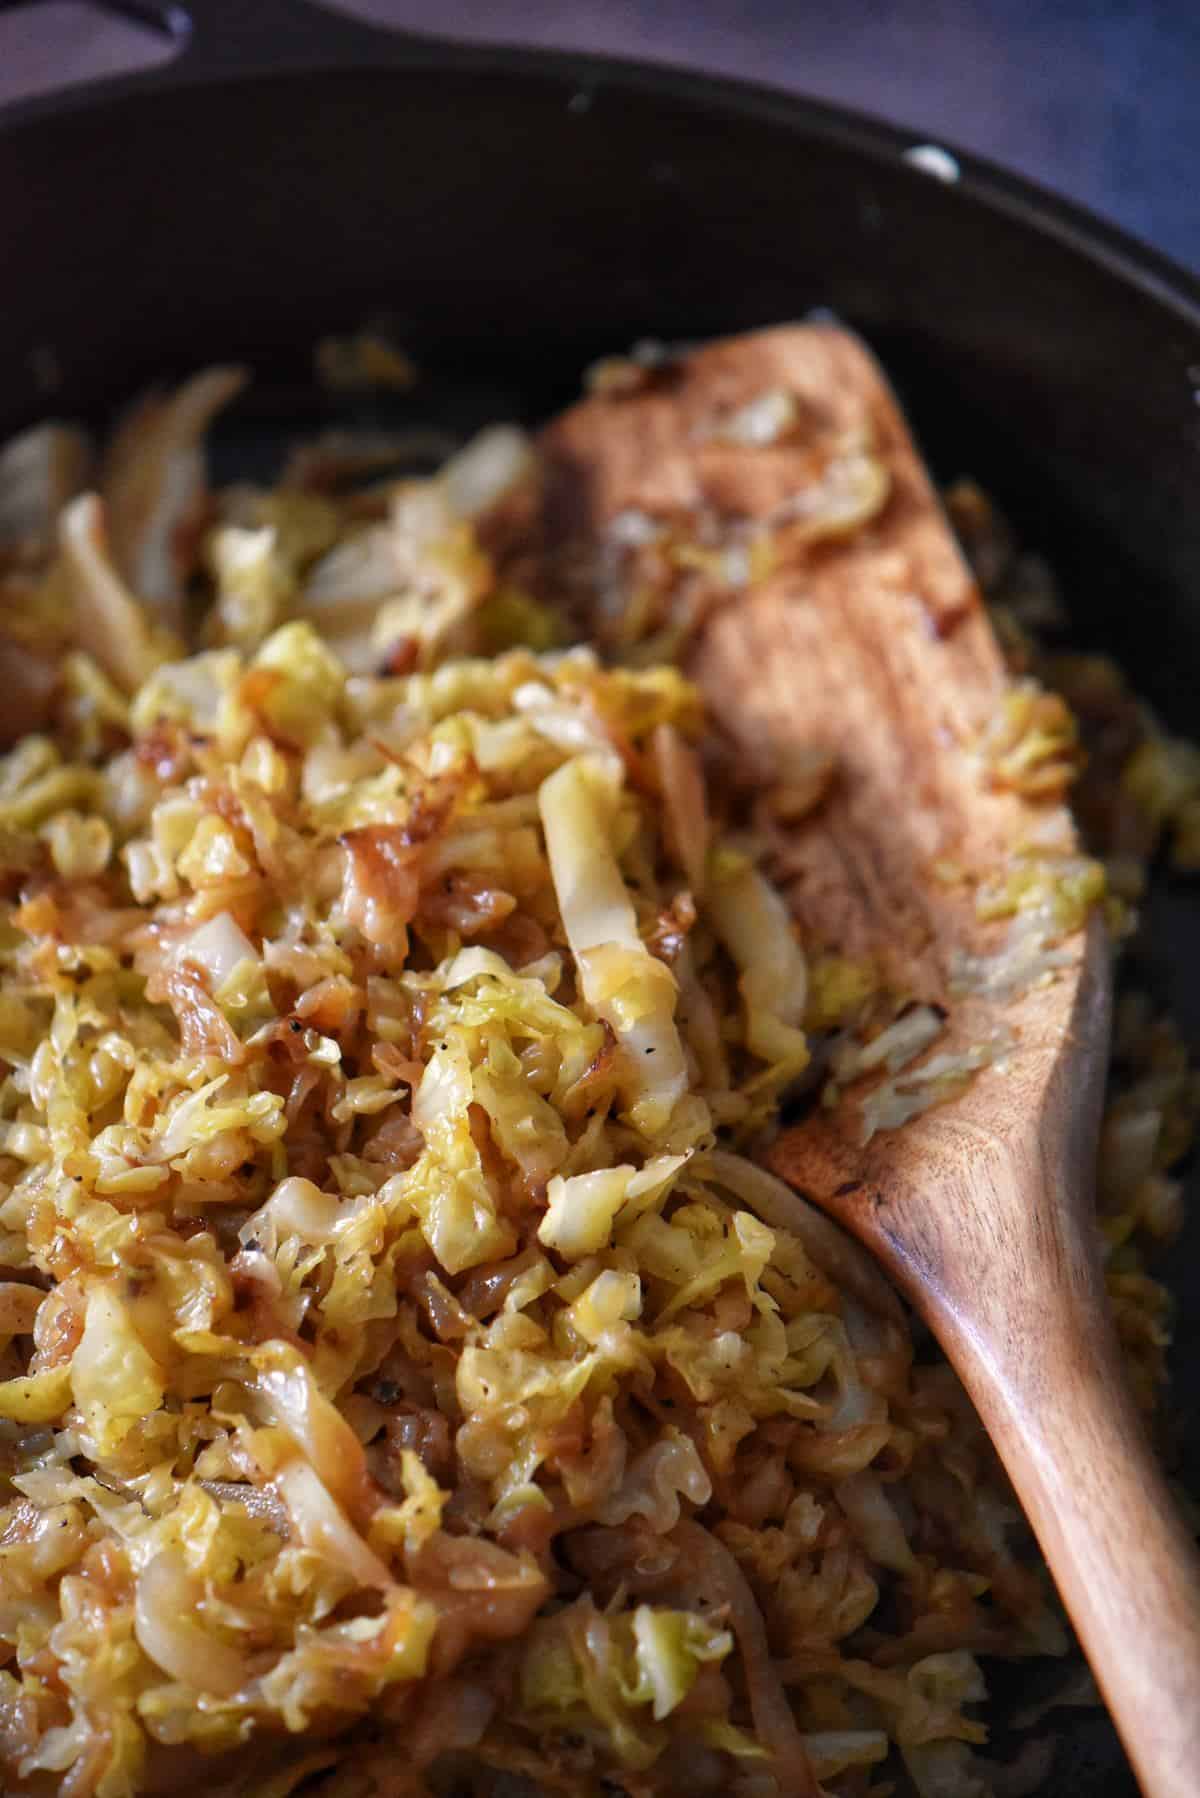 Sauteed cabbage and onions in a cast iron pan.